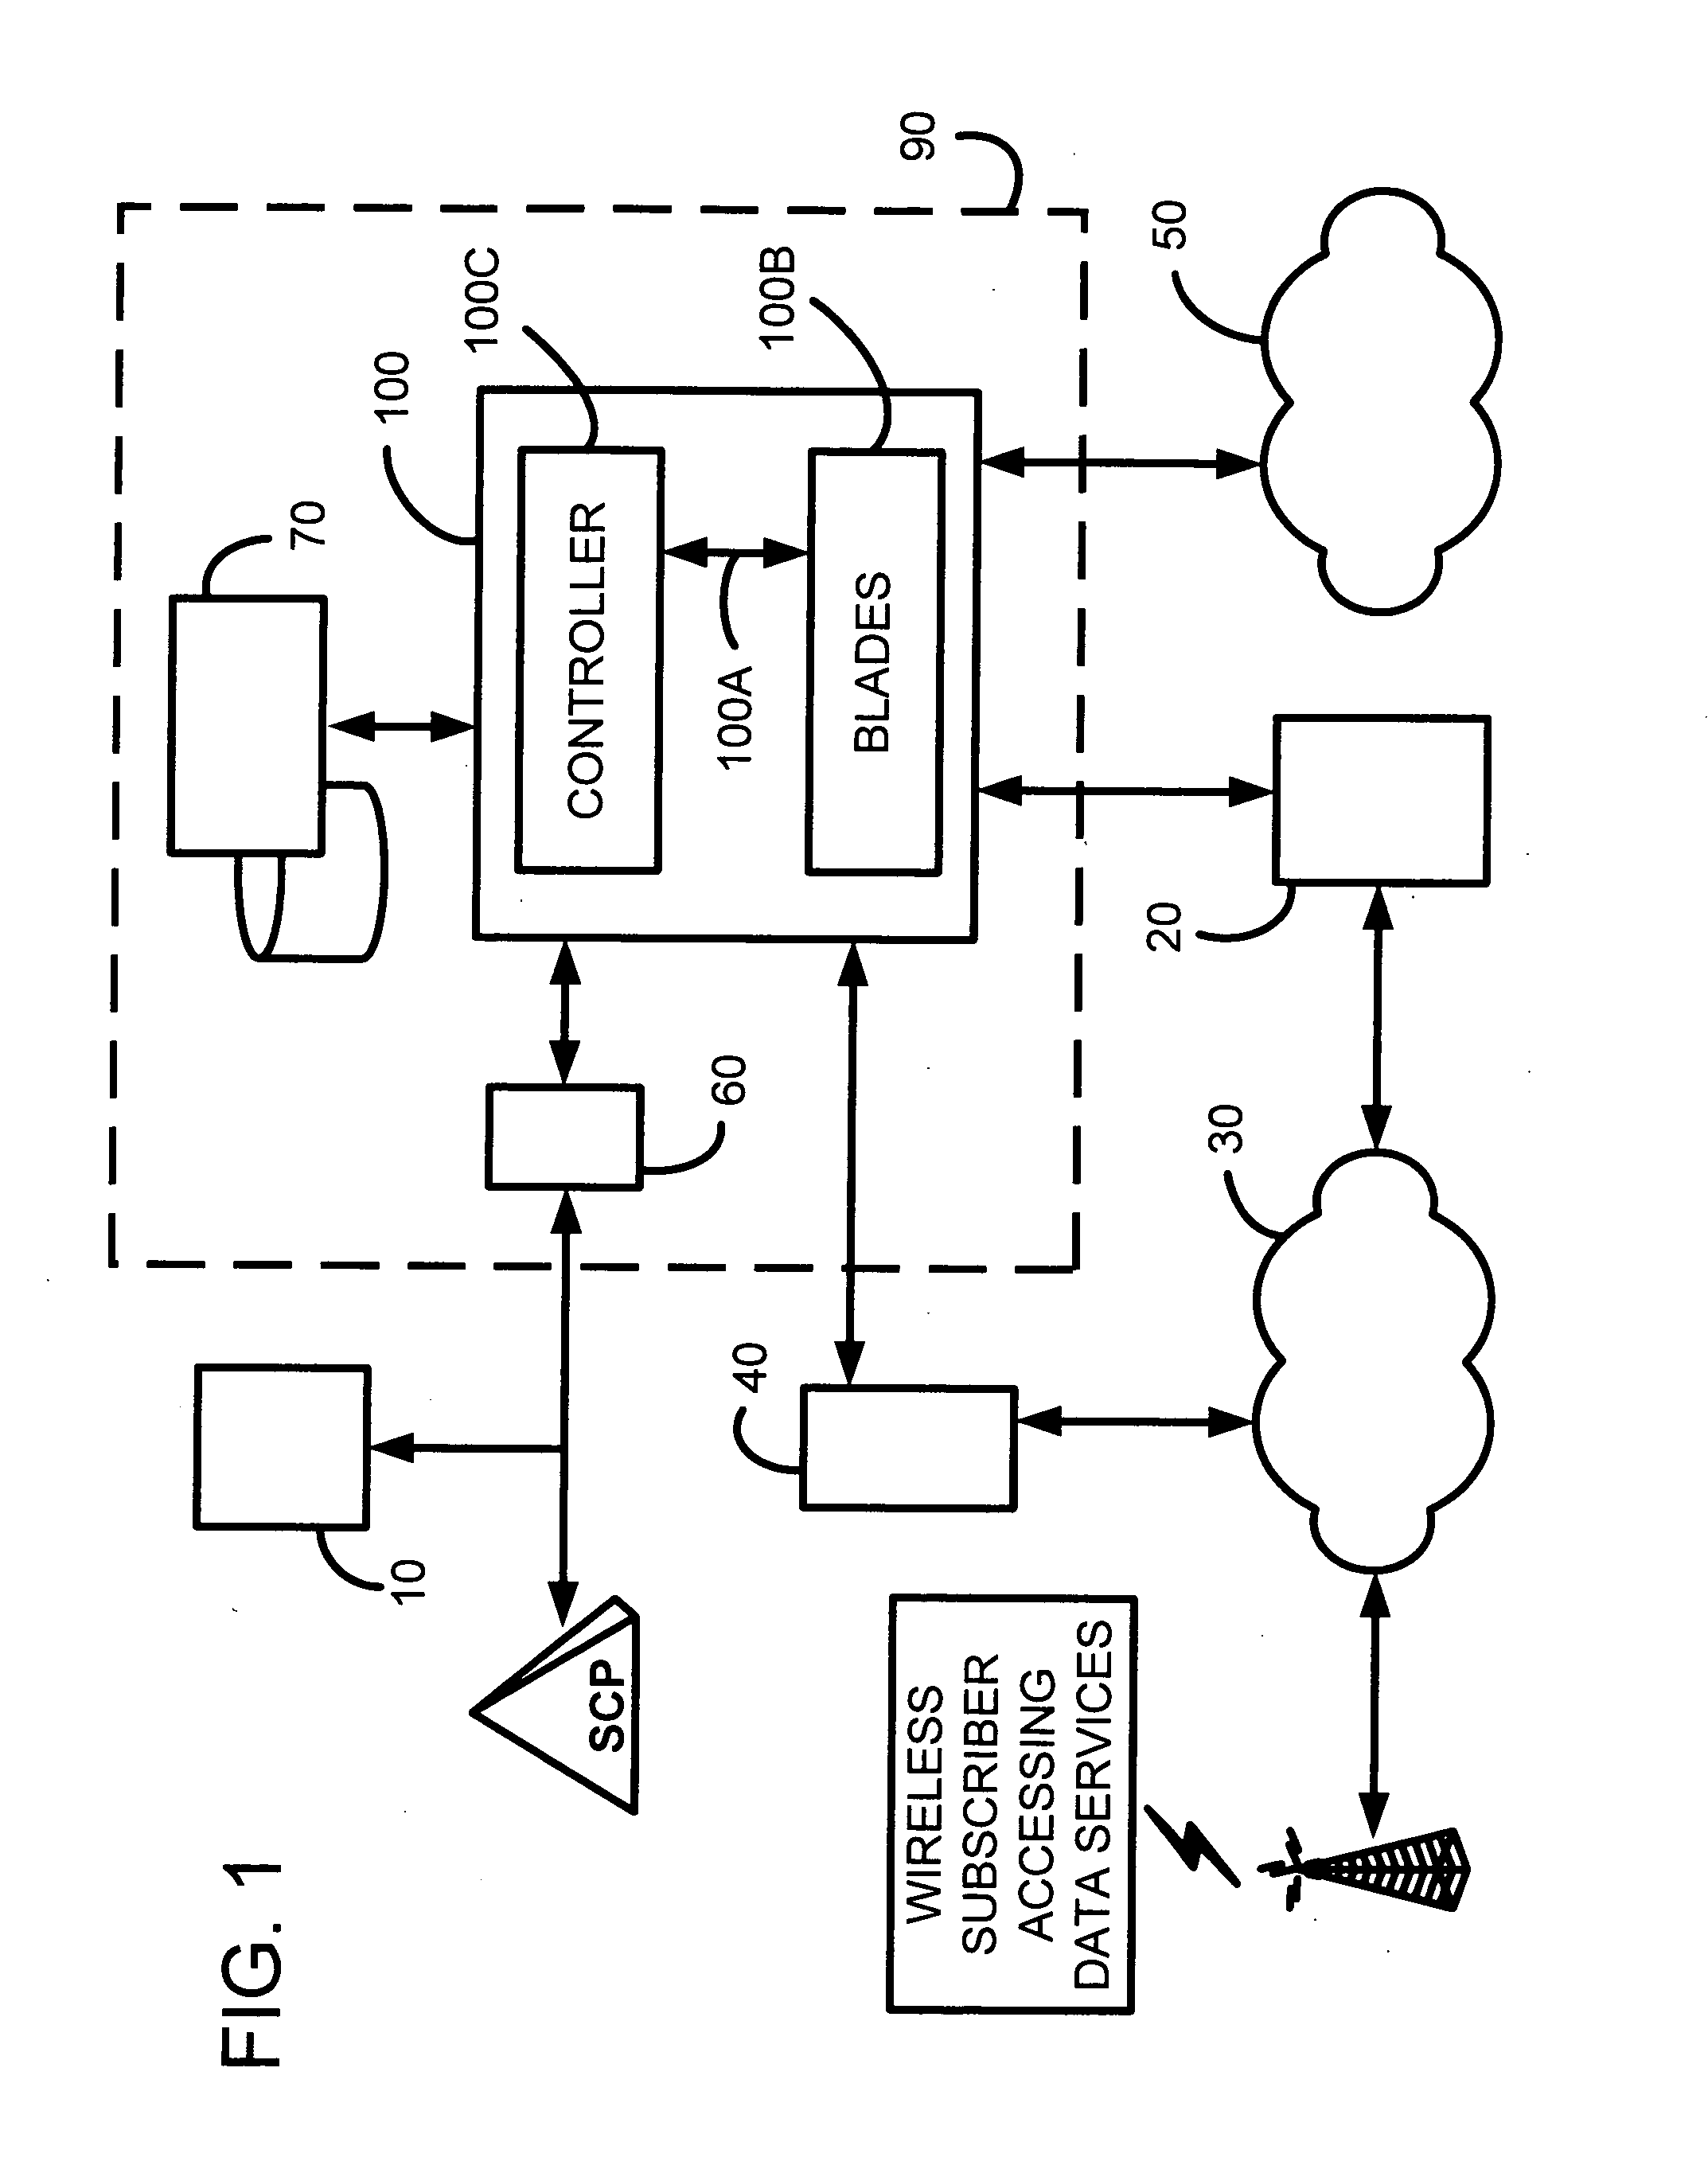 Method for implementing an intelligent content rating middleware platform and gateway system